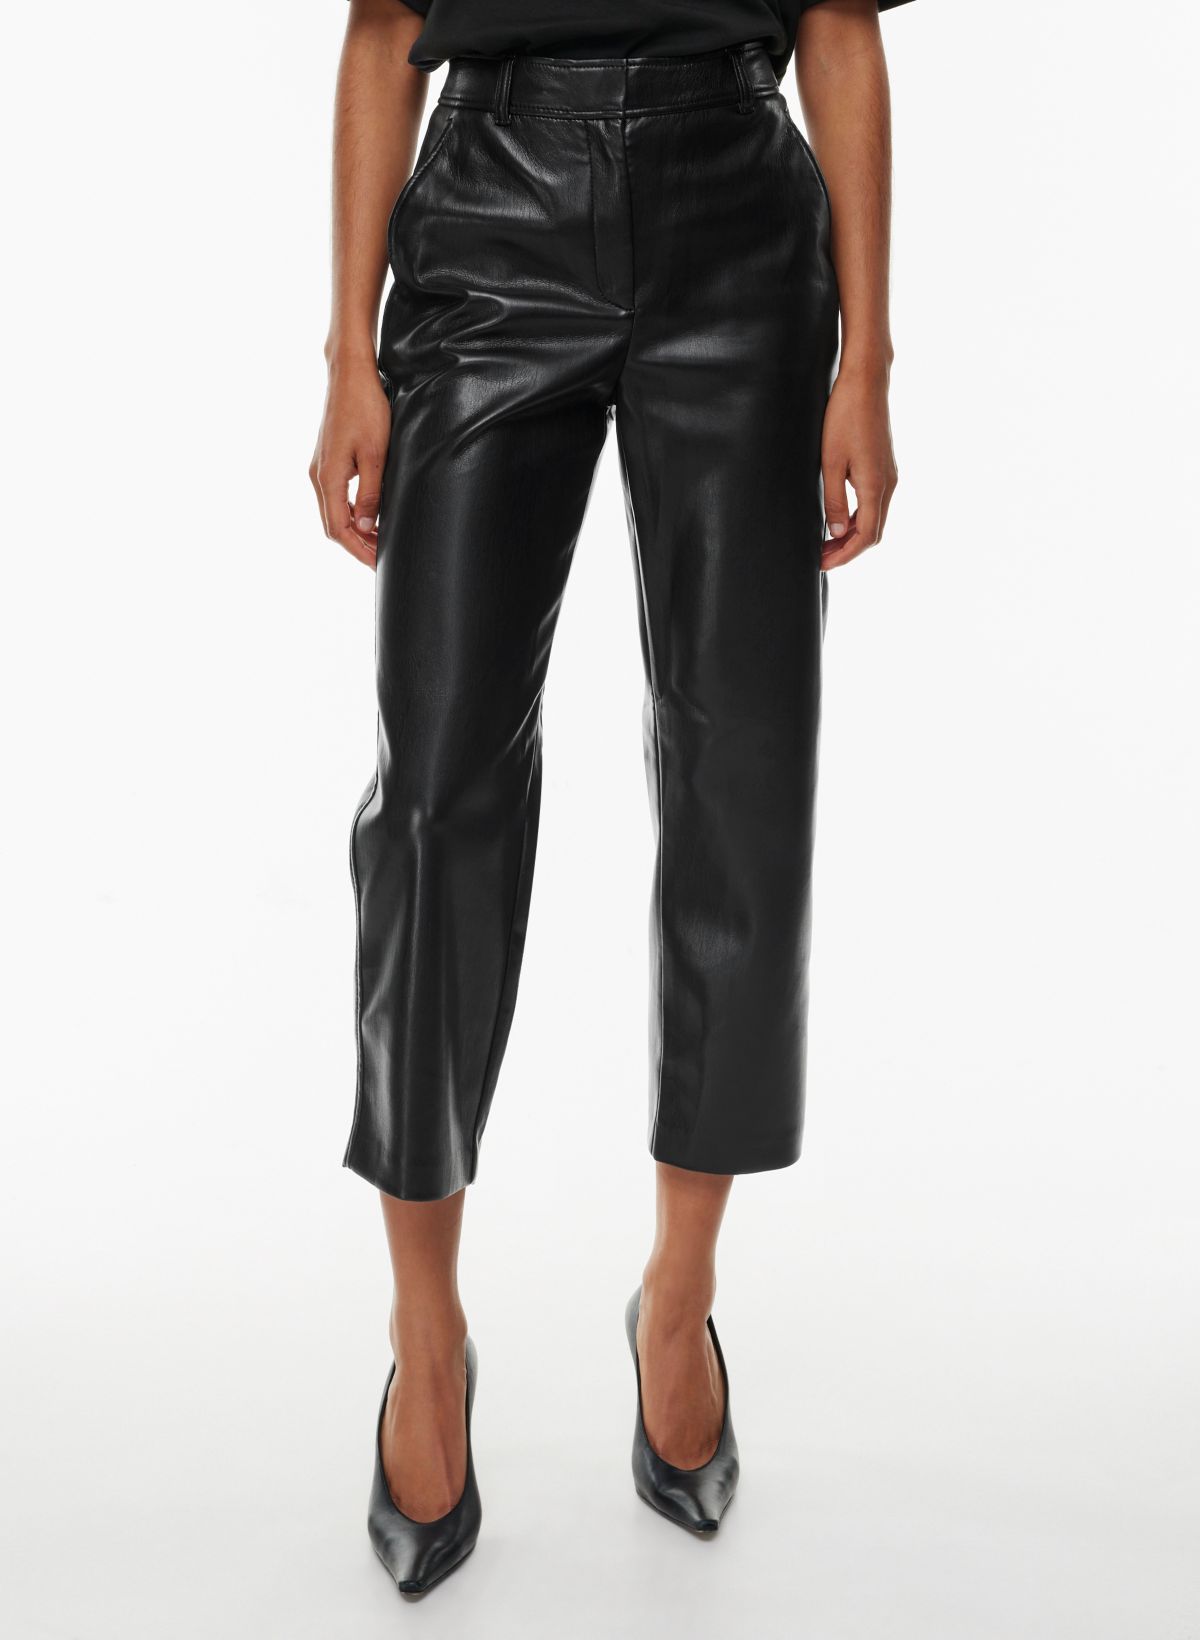 Black Cropped Pants for Women